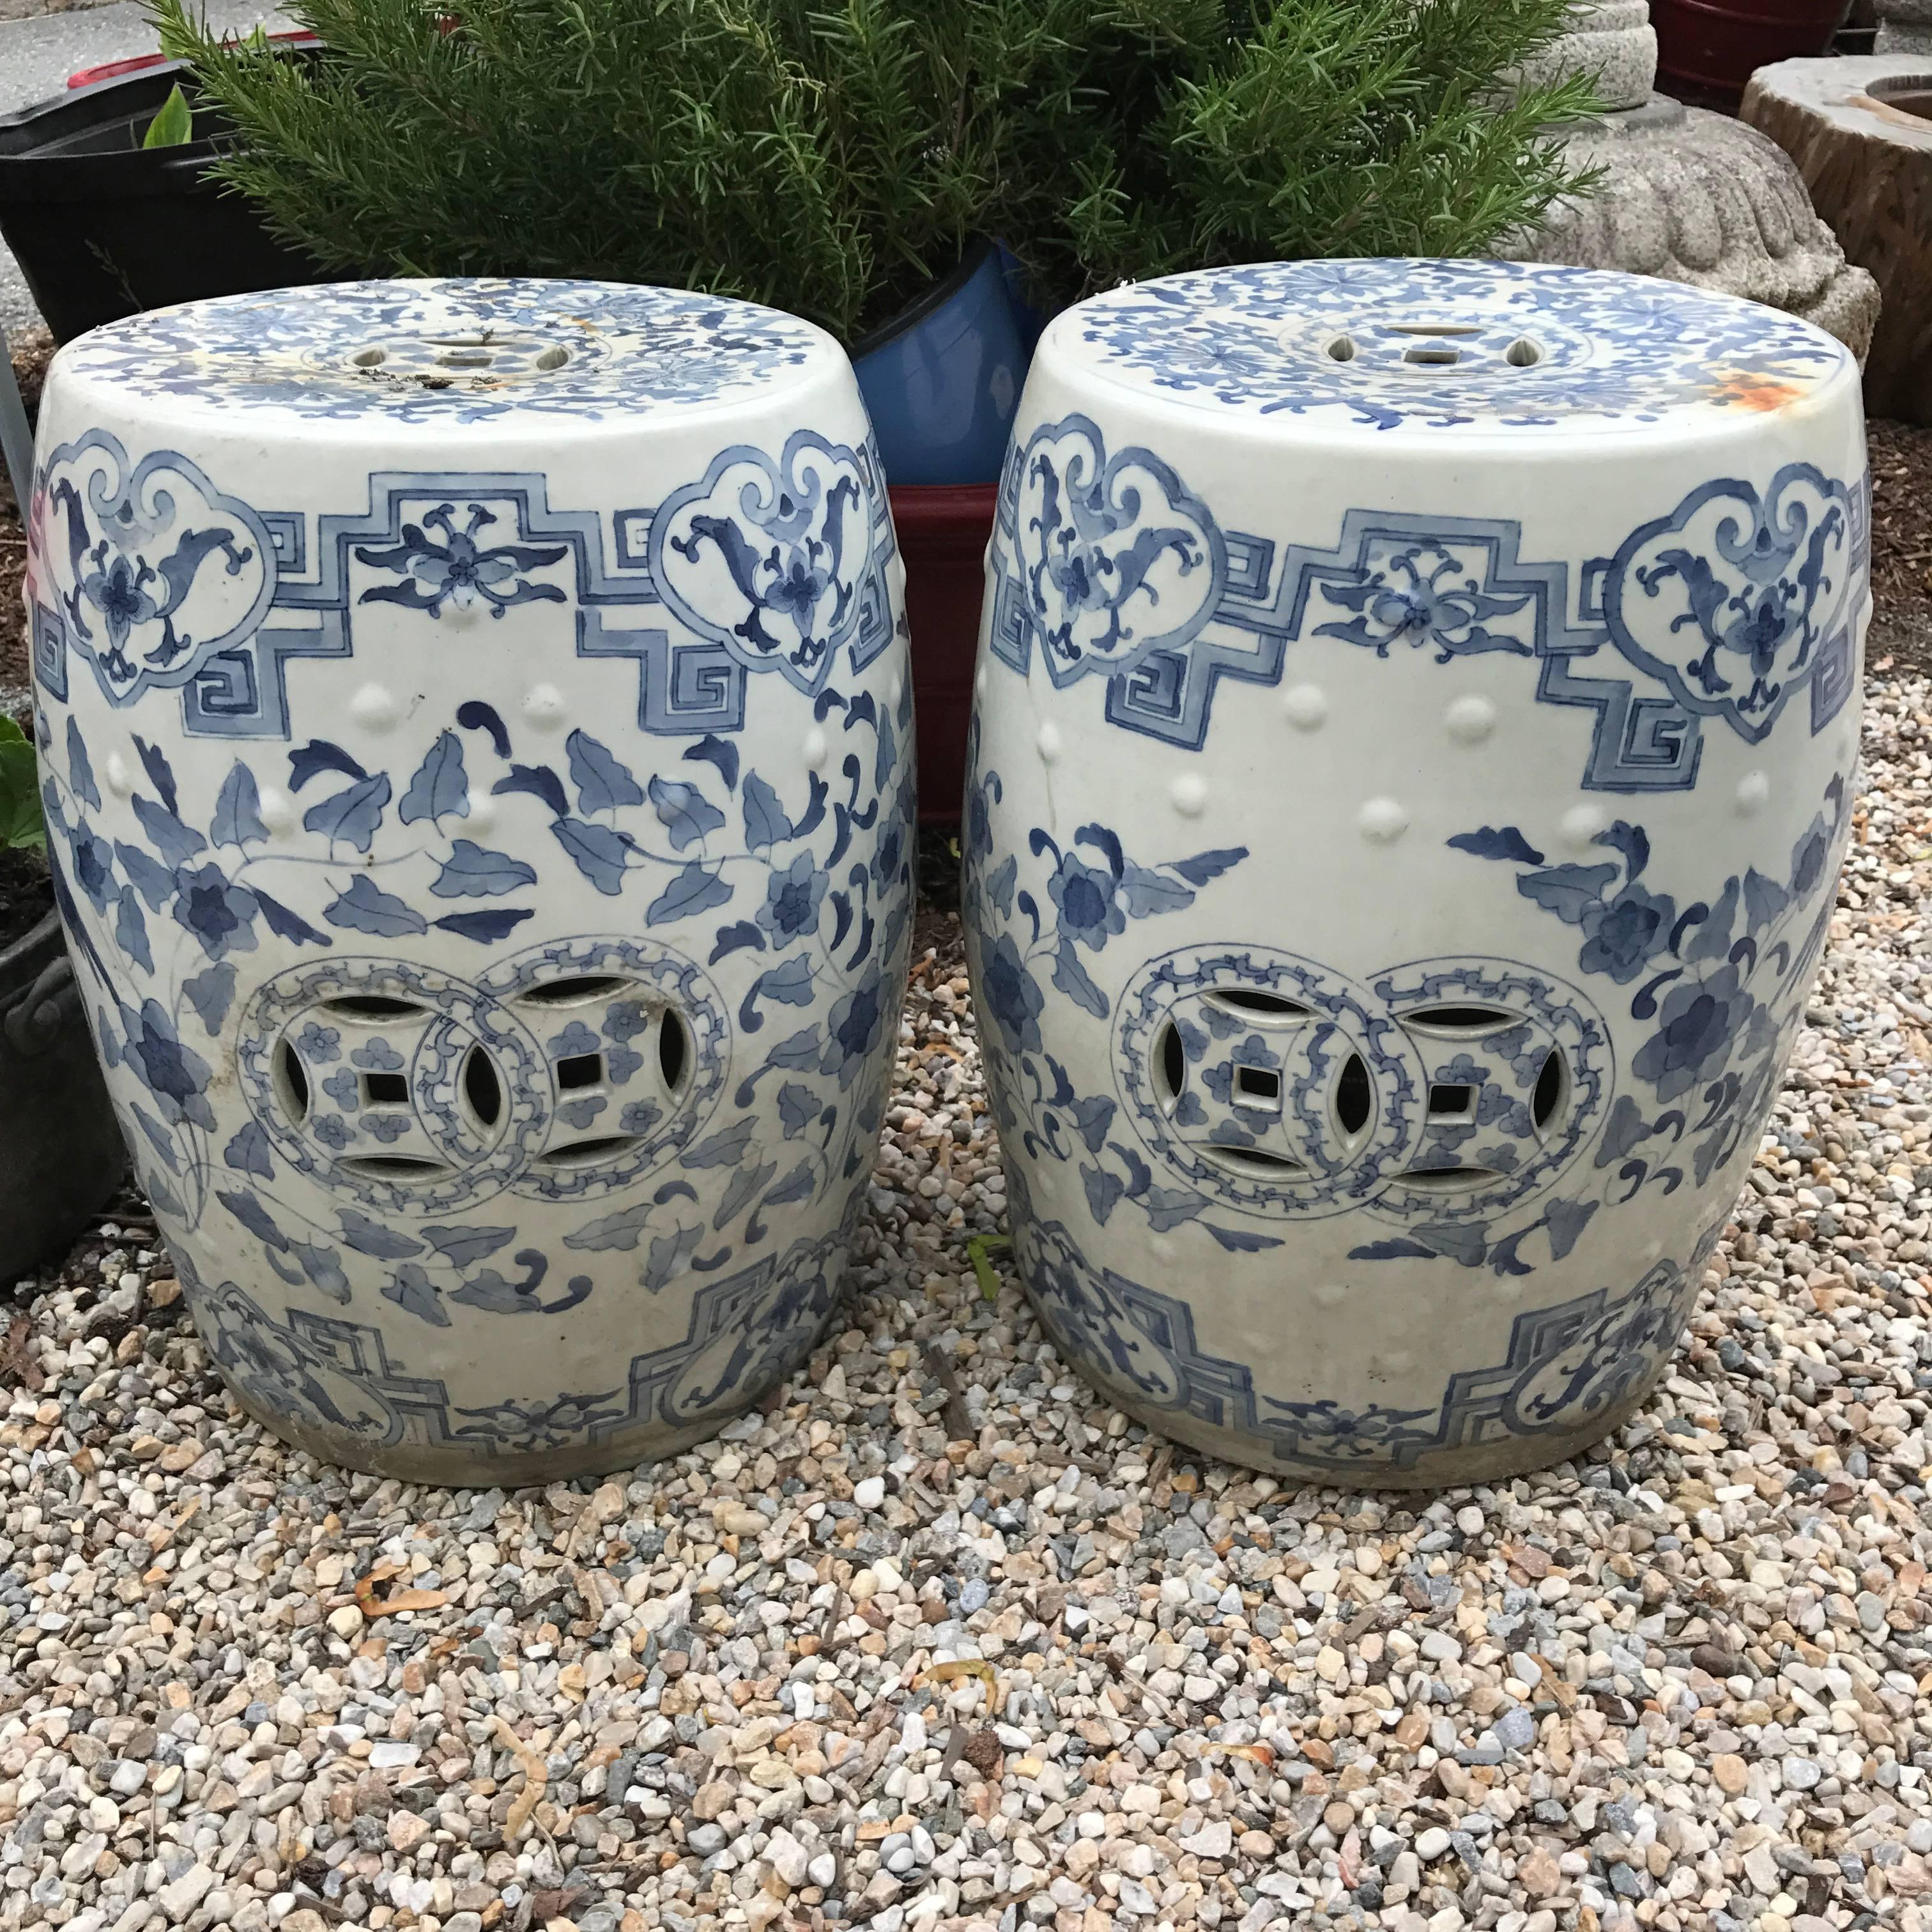 20th Century Chinese Antique Pair of Hand-Painted Blue and White Garden Stools Seats